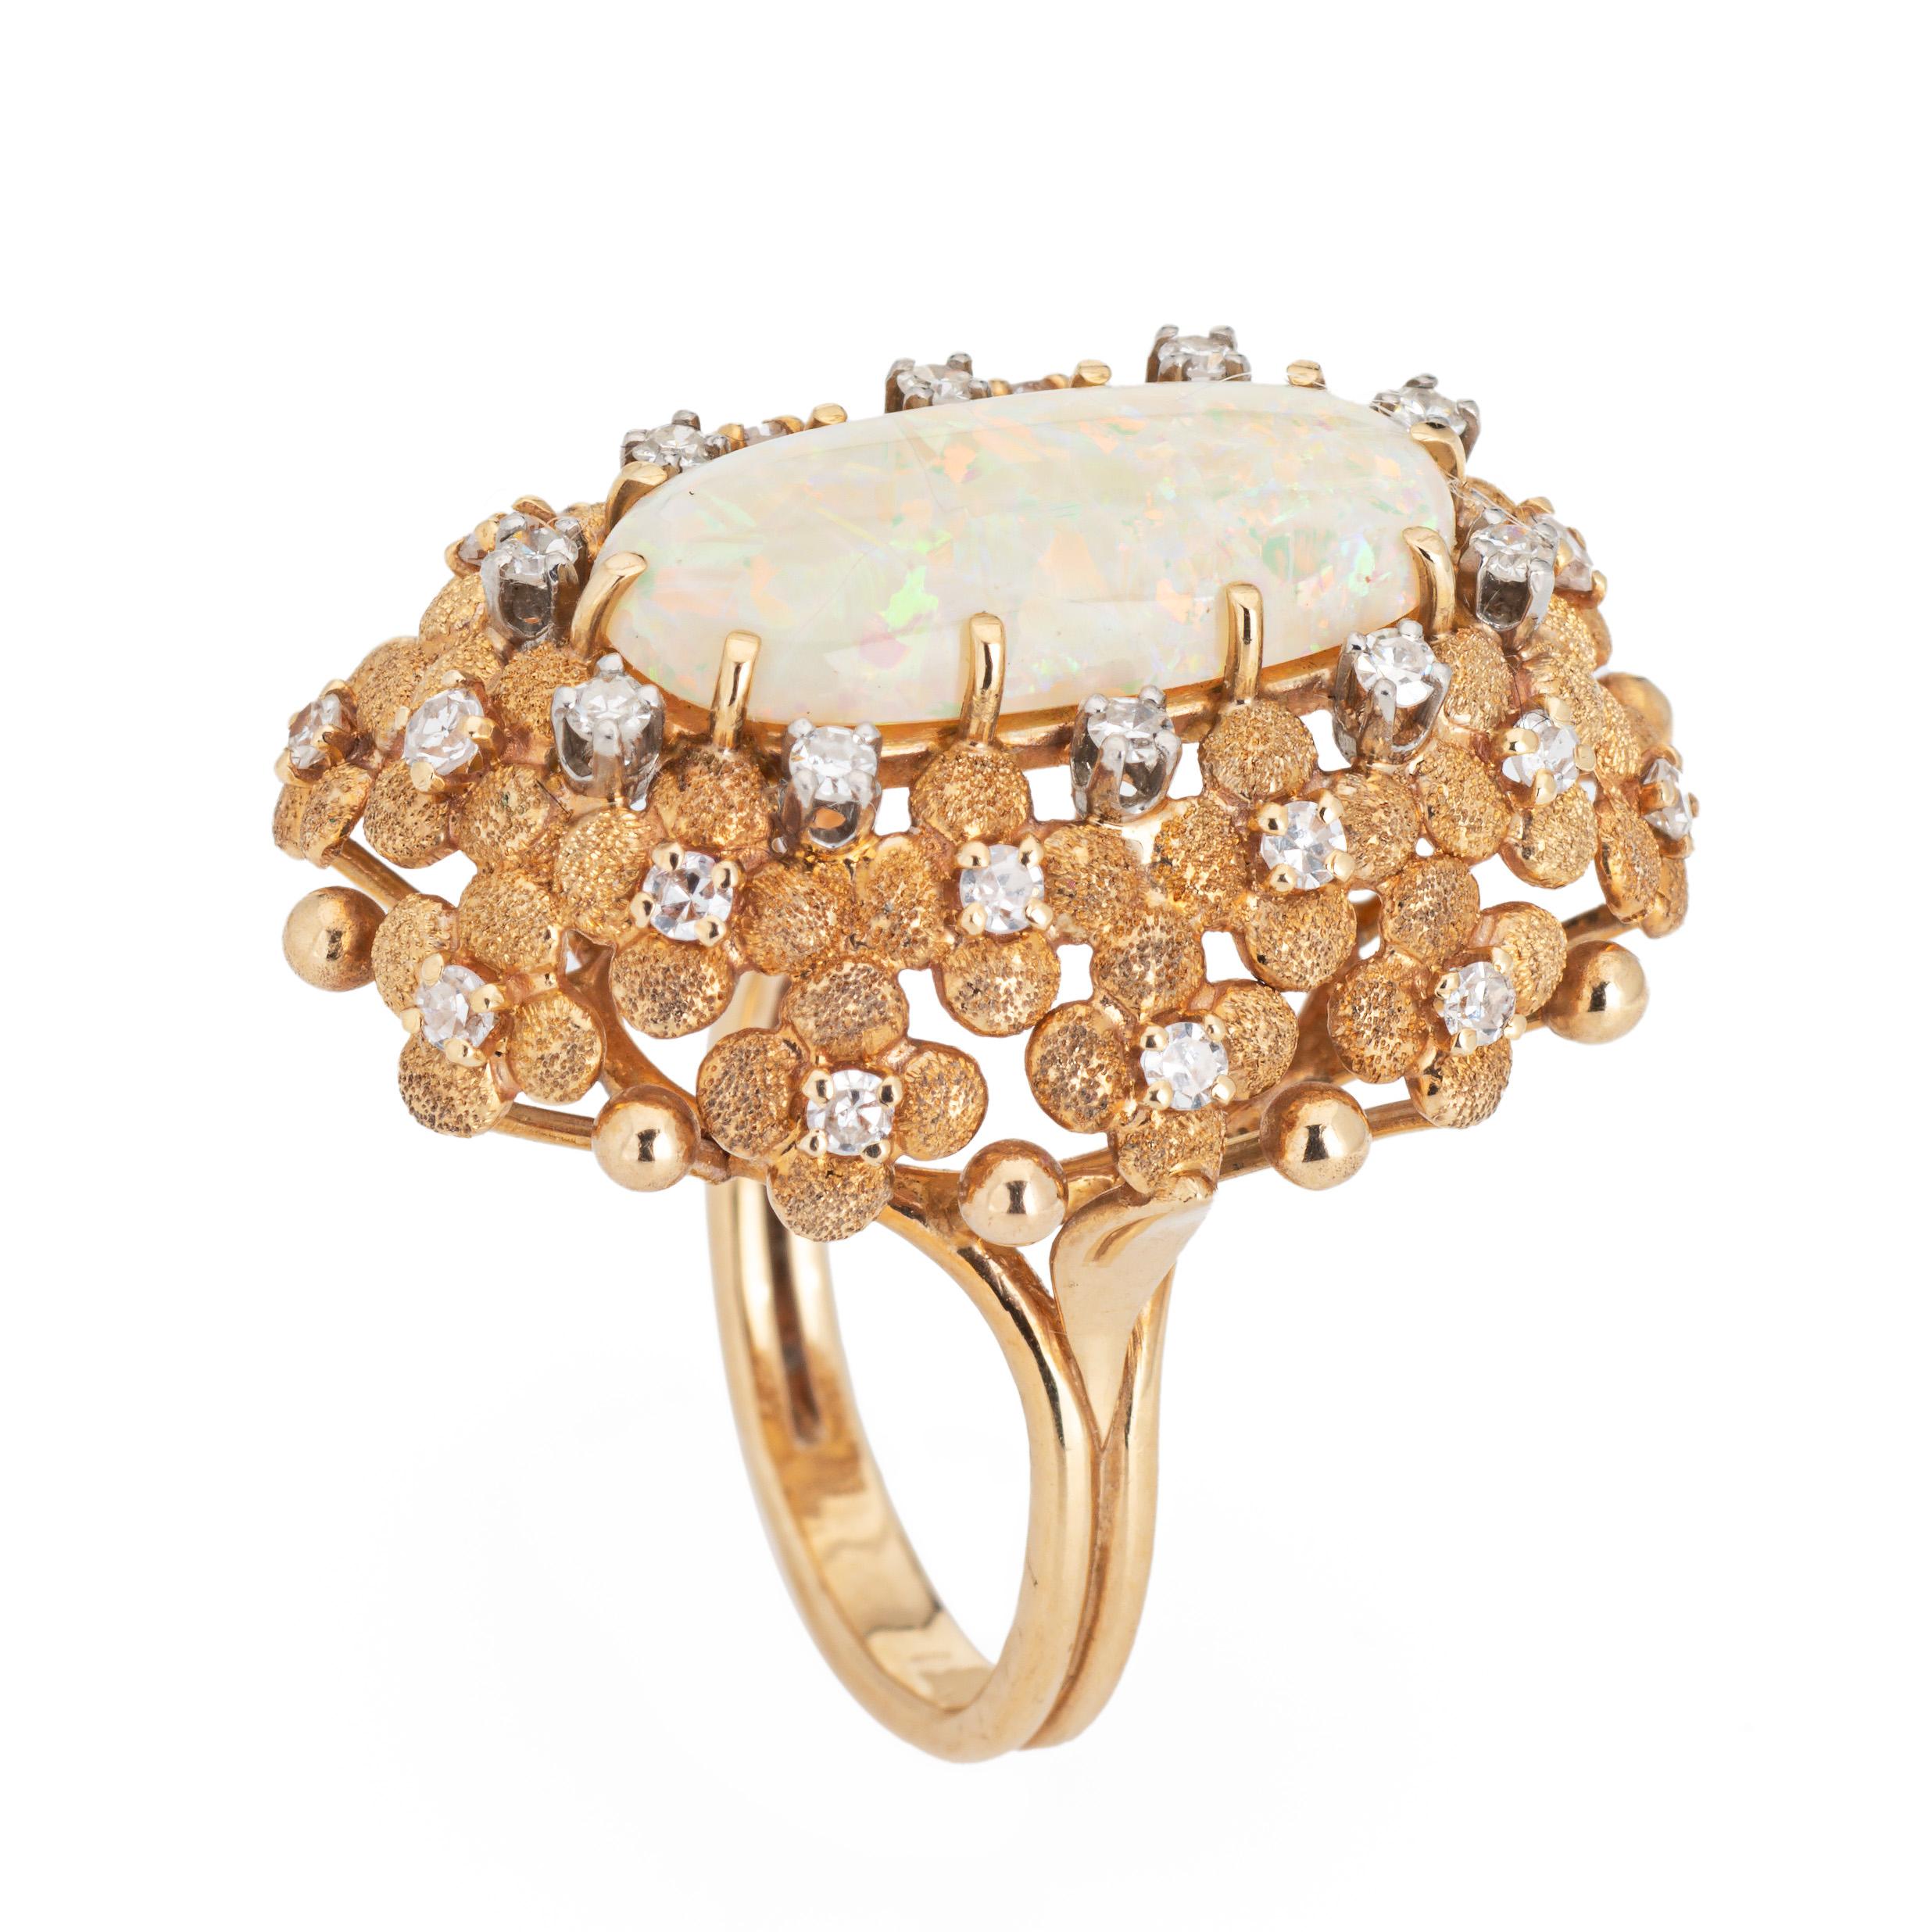 Stylish and finely detailed large opal & diamond cocktail ring crafted in 14 karat yellow gold (circa 1960s).

Cabochon cut opal measures 20mm x 9mm. 30 single cut diamonds total an estimated 0.30 carats (estimated at H-I color and VS2-SI2 clarity).